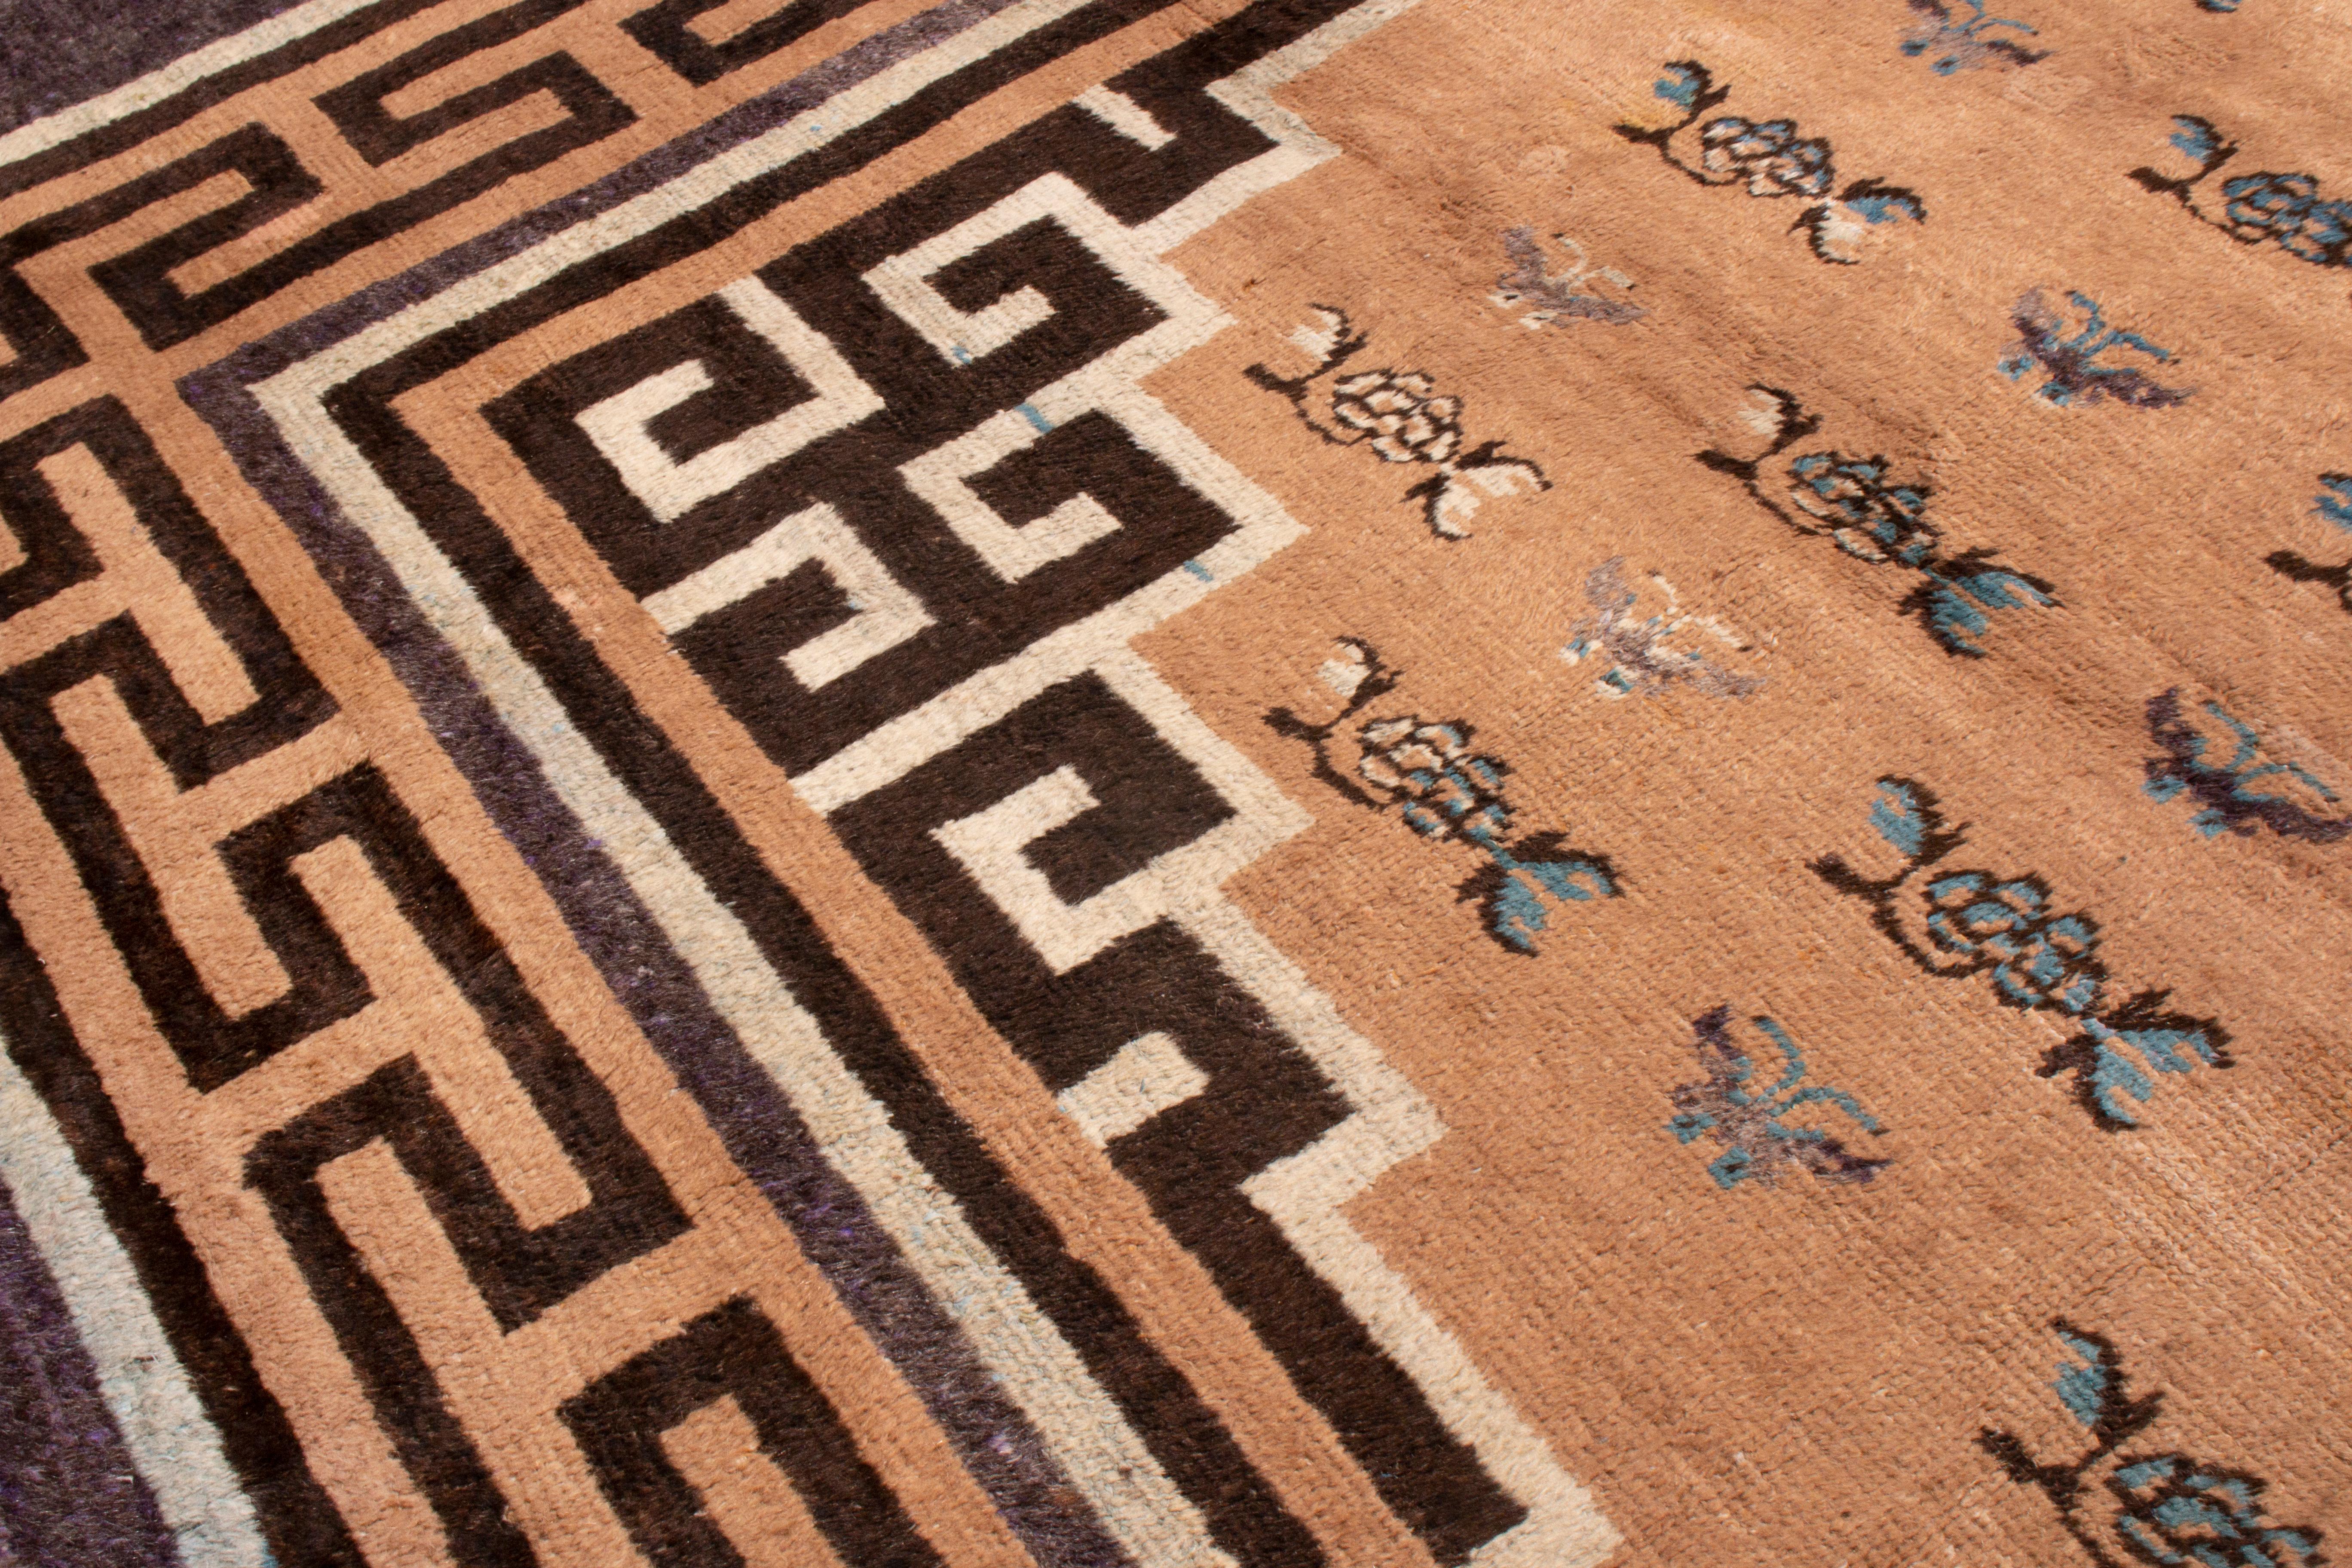 Hand-Knotted Antique Mongolian Purple and Brown Geometric-Floral Rug